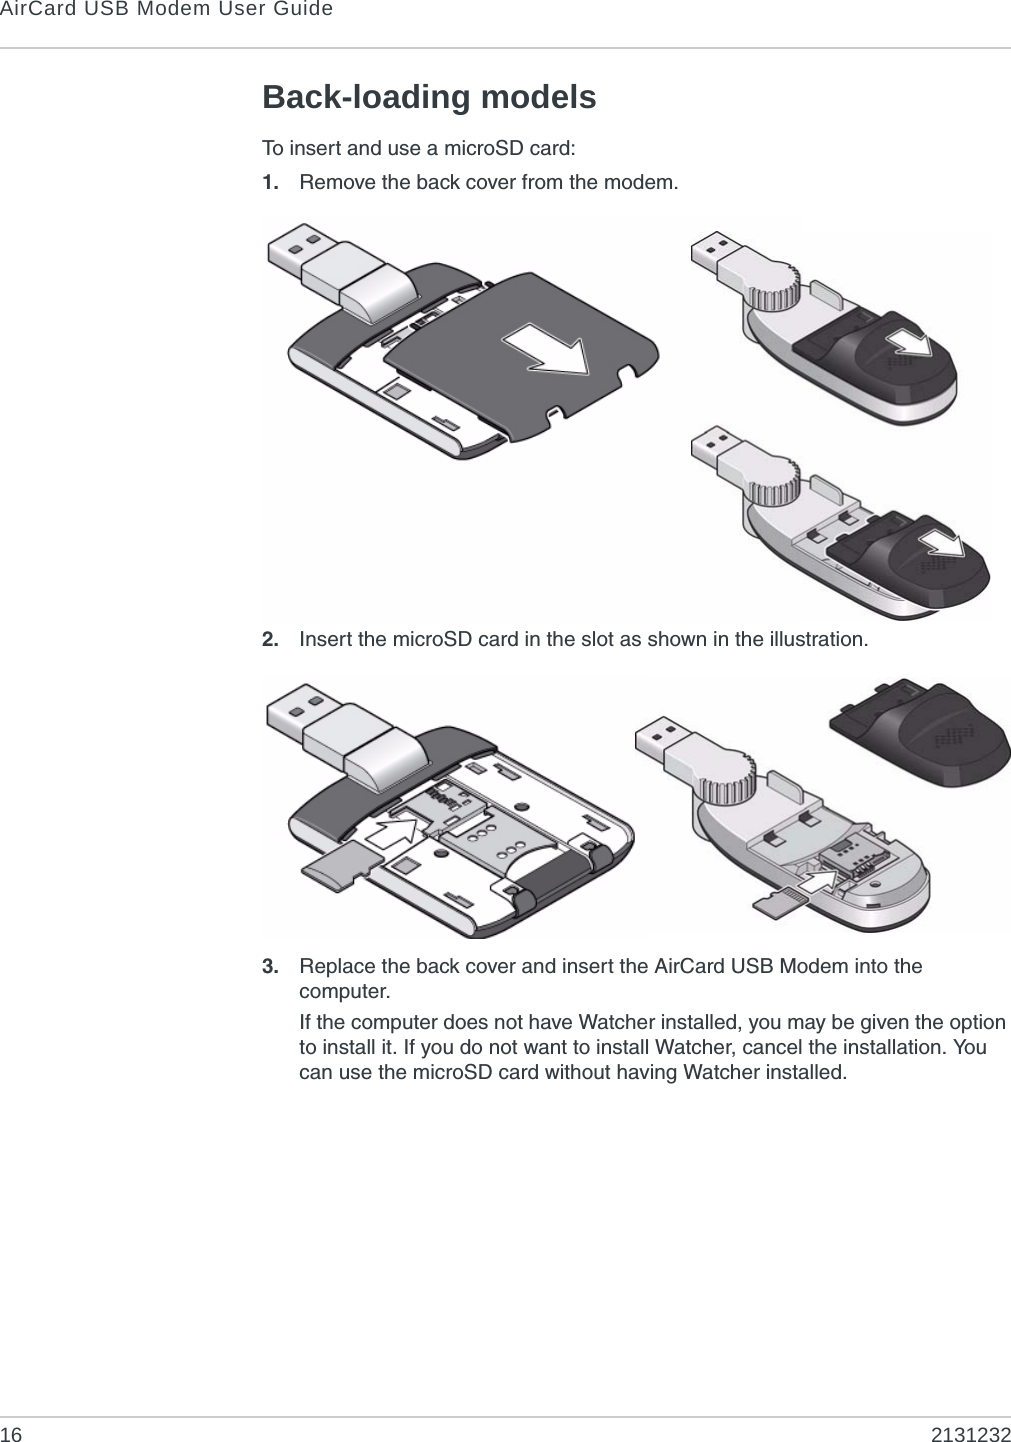 AirCard USB Modem User Guide16 2131232Back-loading modelsTo insert and use a microSD card:1. Remove the back cover from the modem.2. Insert the microSD card in the slot as shown in the illustration.3. Replace the back cover and insert the AirCard USB Modem into the computer.If the computer does not have Watcher installed, you may be given the option to install it. If you do not want to install Watcher, cancel the installation. You can use the microSD card without having Watcher installed.